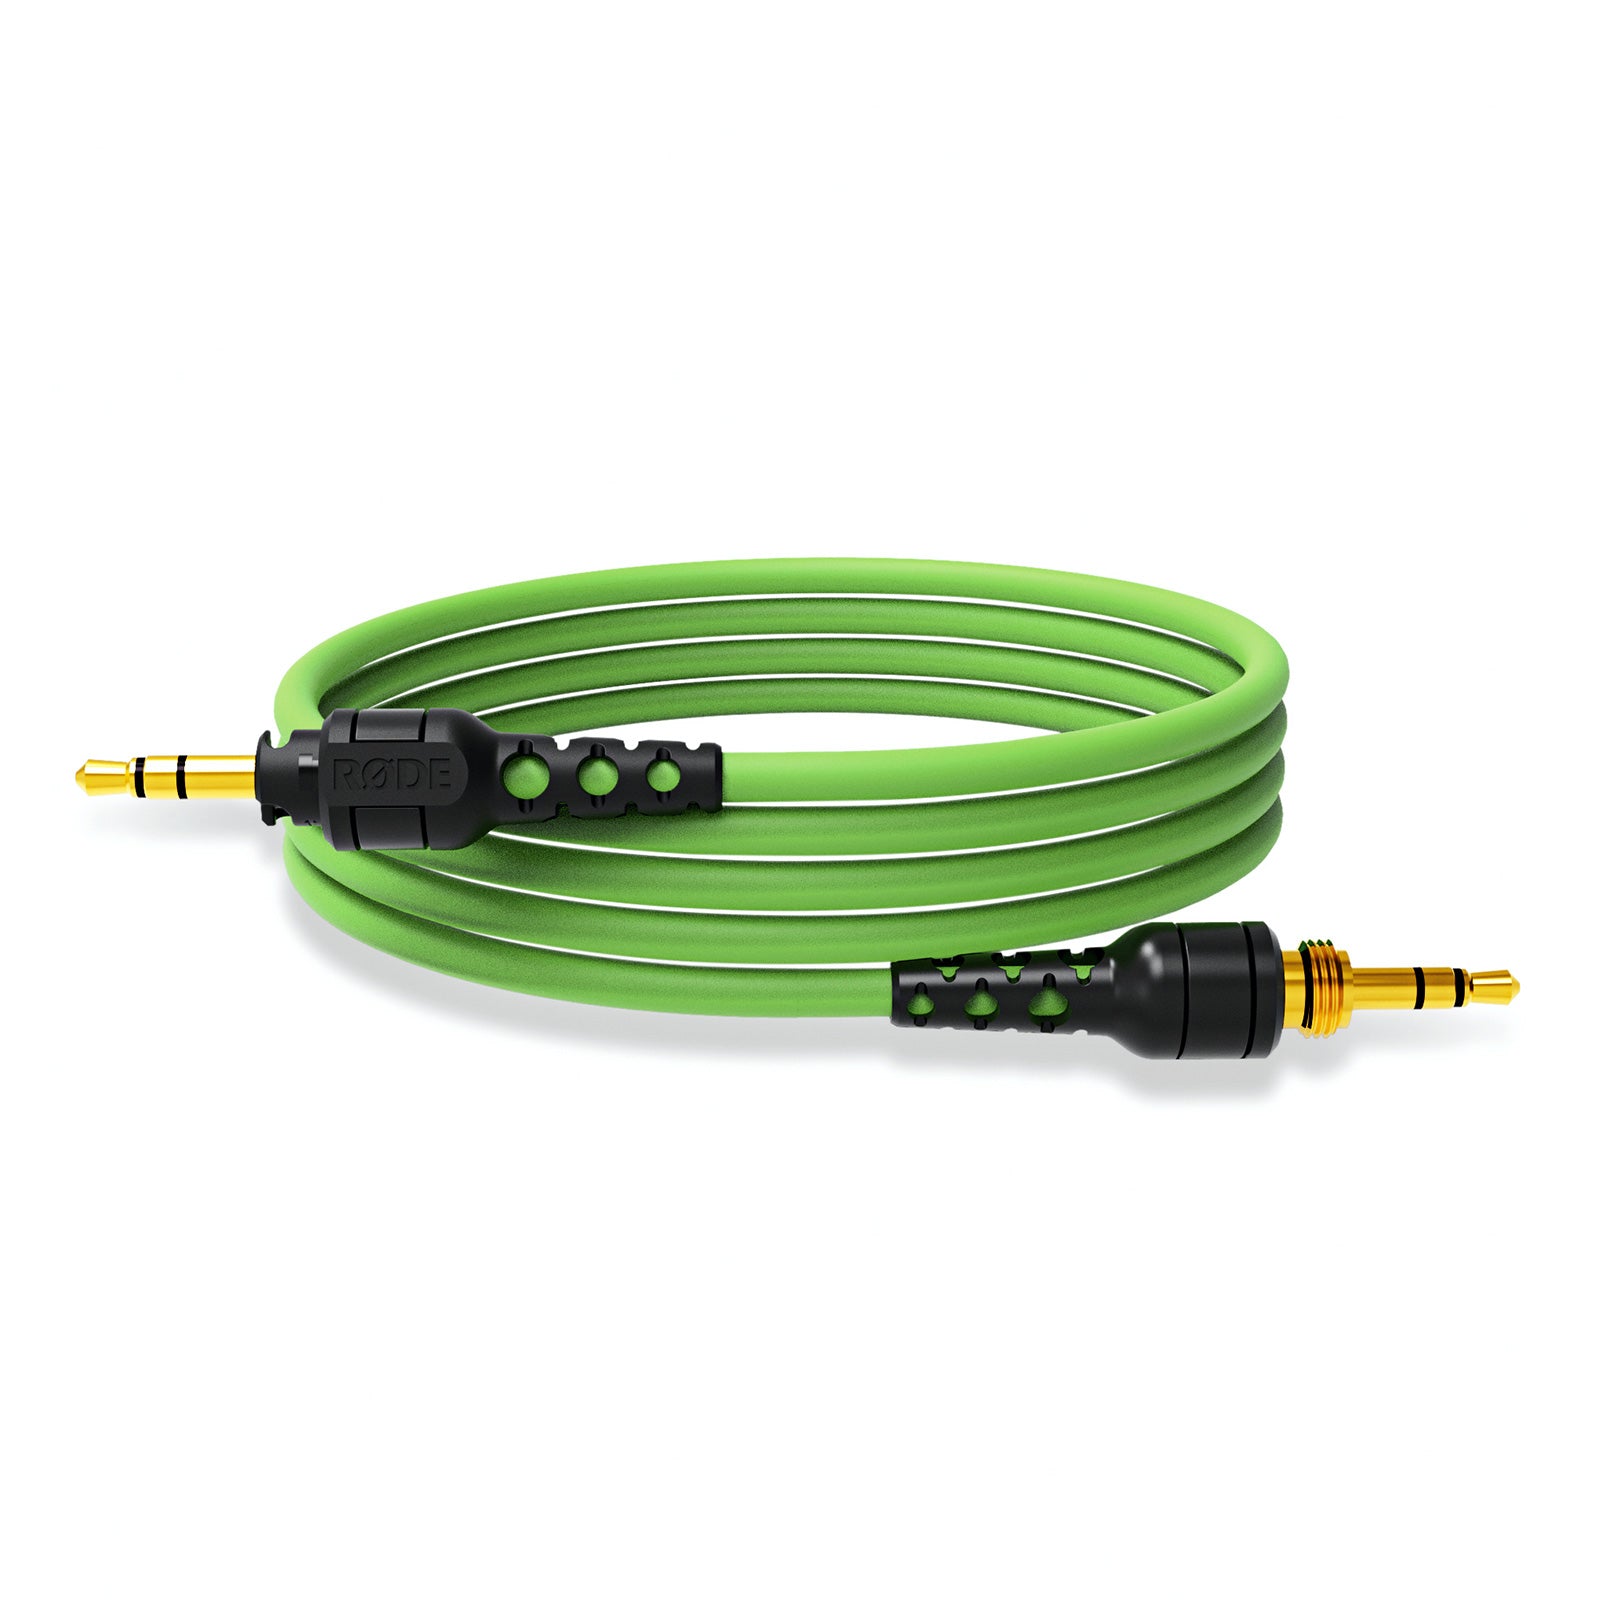 RODE(ロード) NTH-ケーブル12 Green(グリーン) NTH-CABLE12G